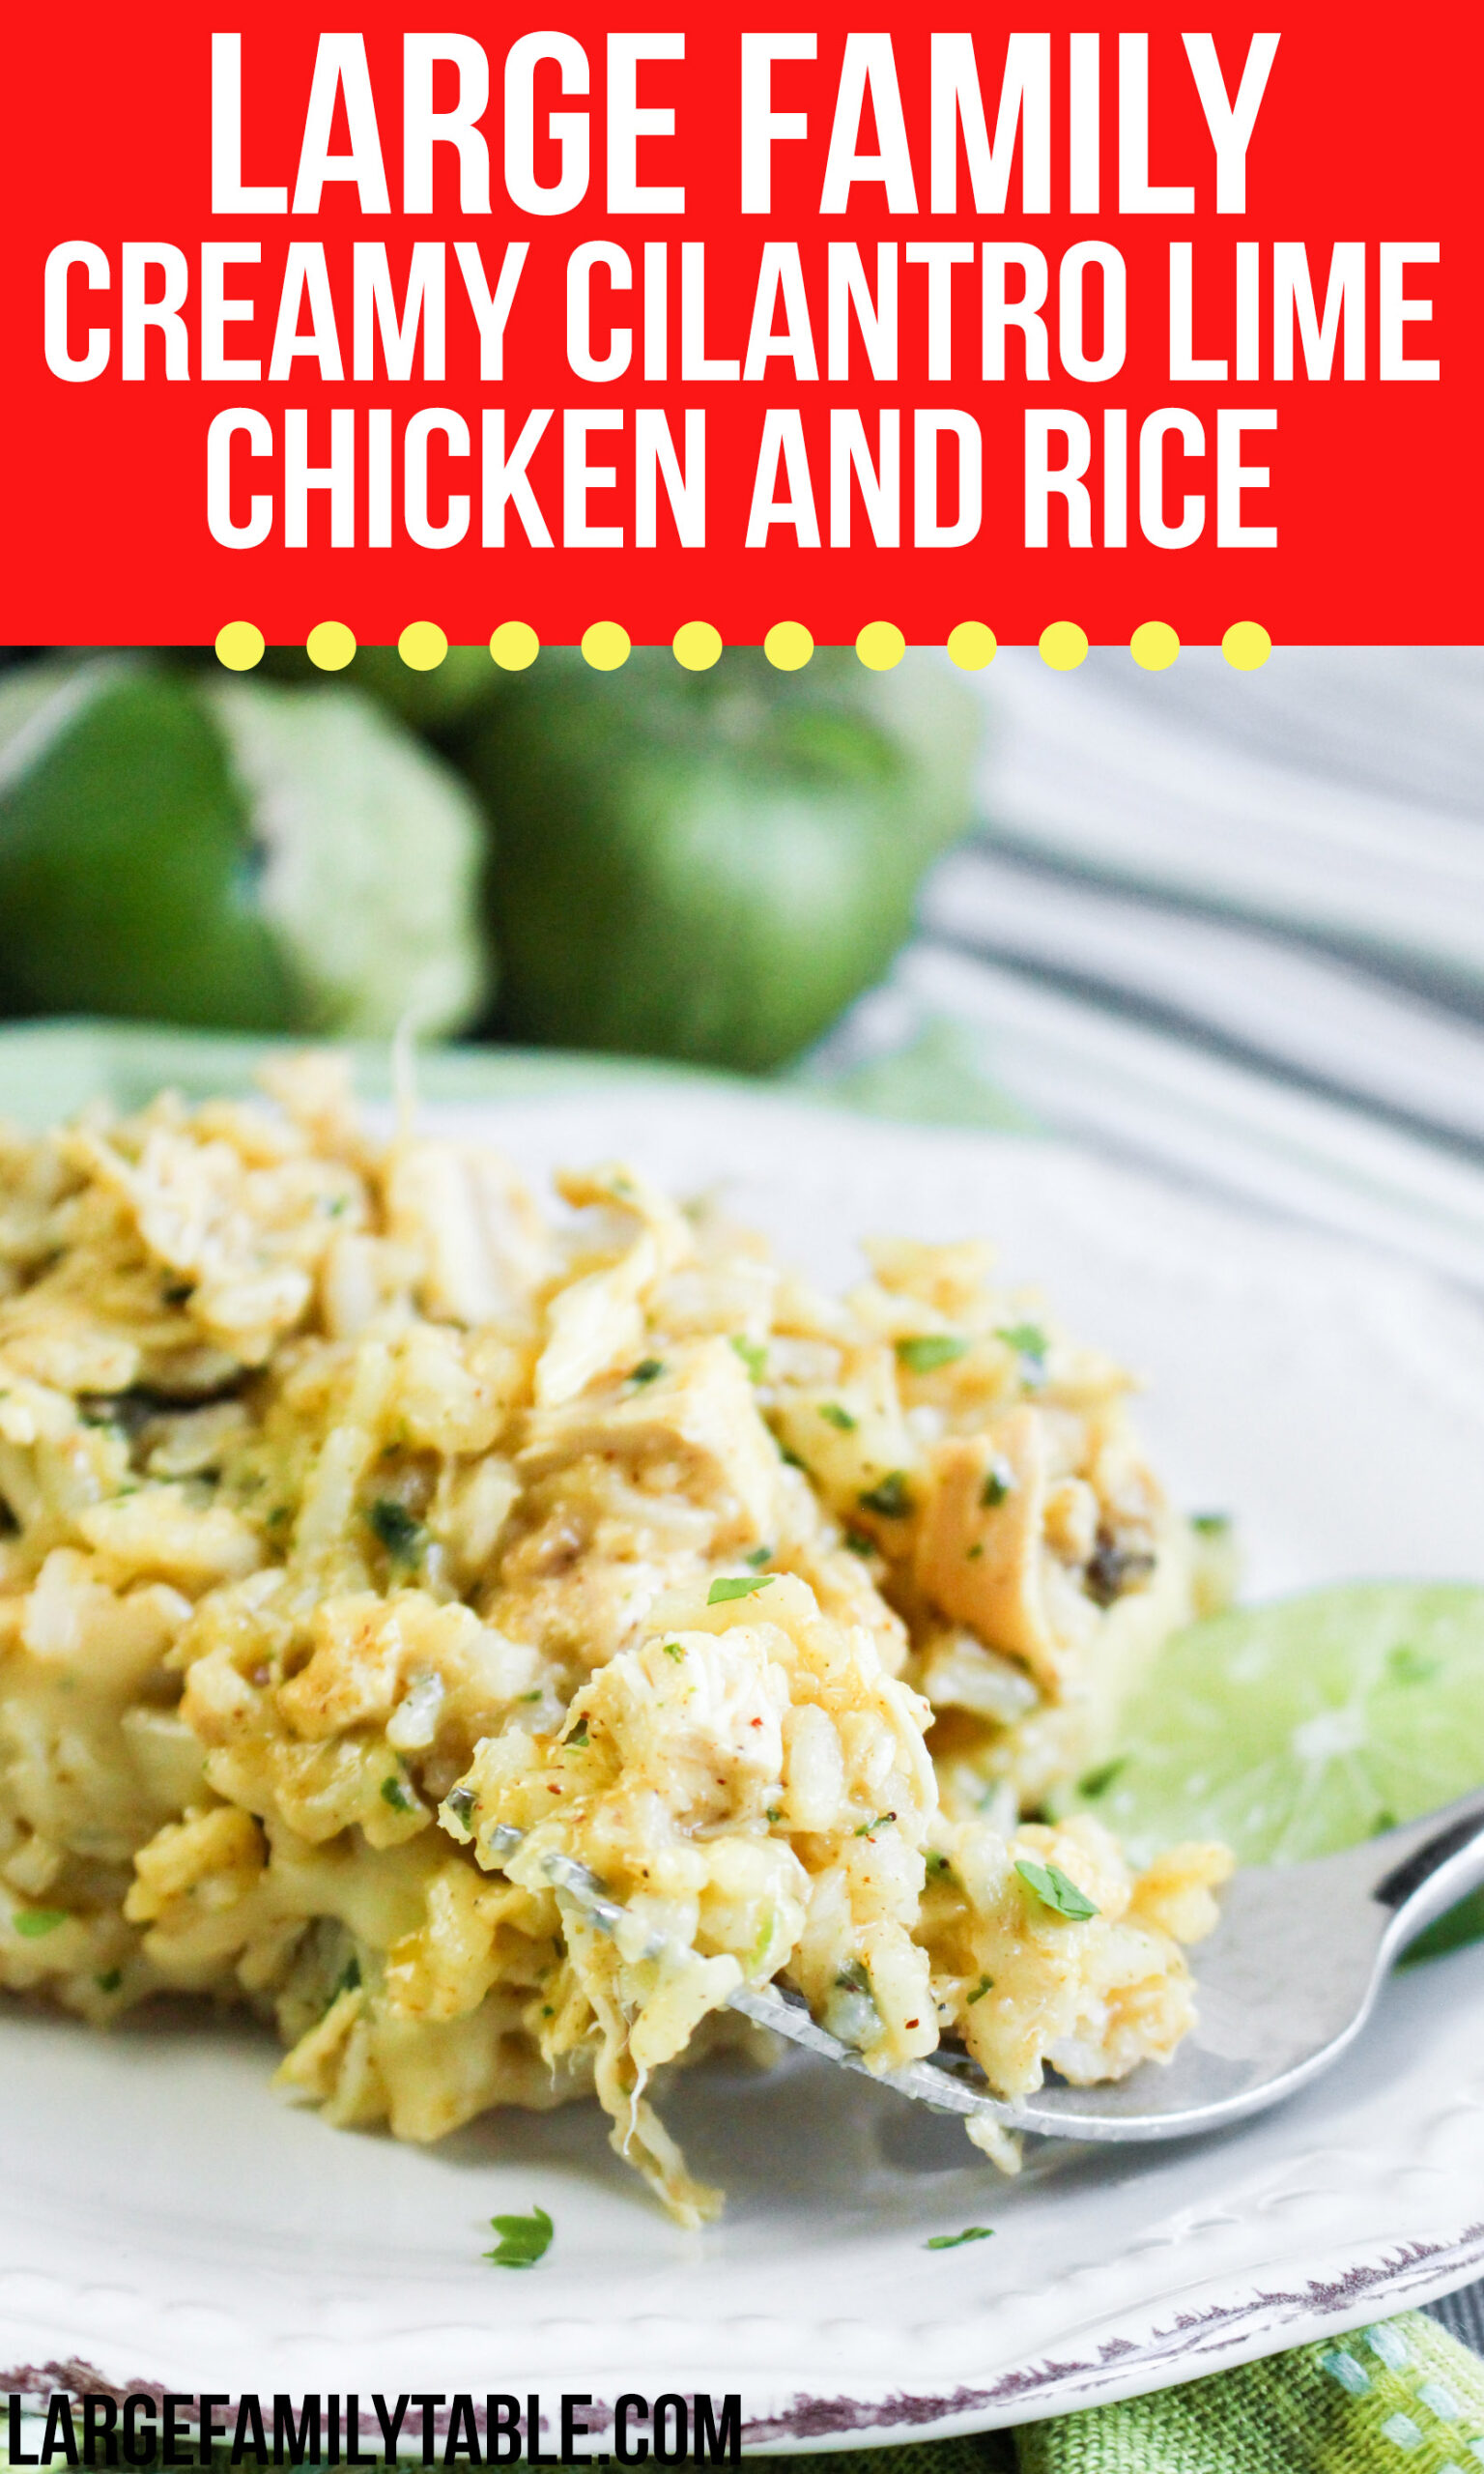 Large-Family-Creamy-Cilantro-Lime-Chicken-and-Rice-2